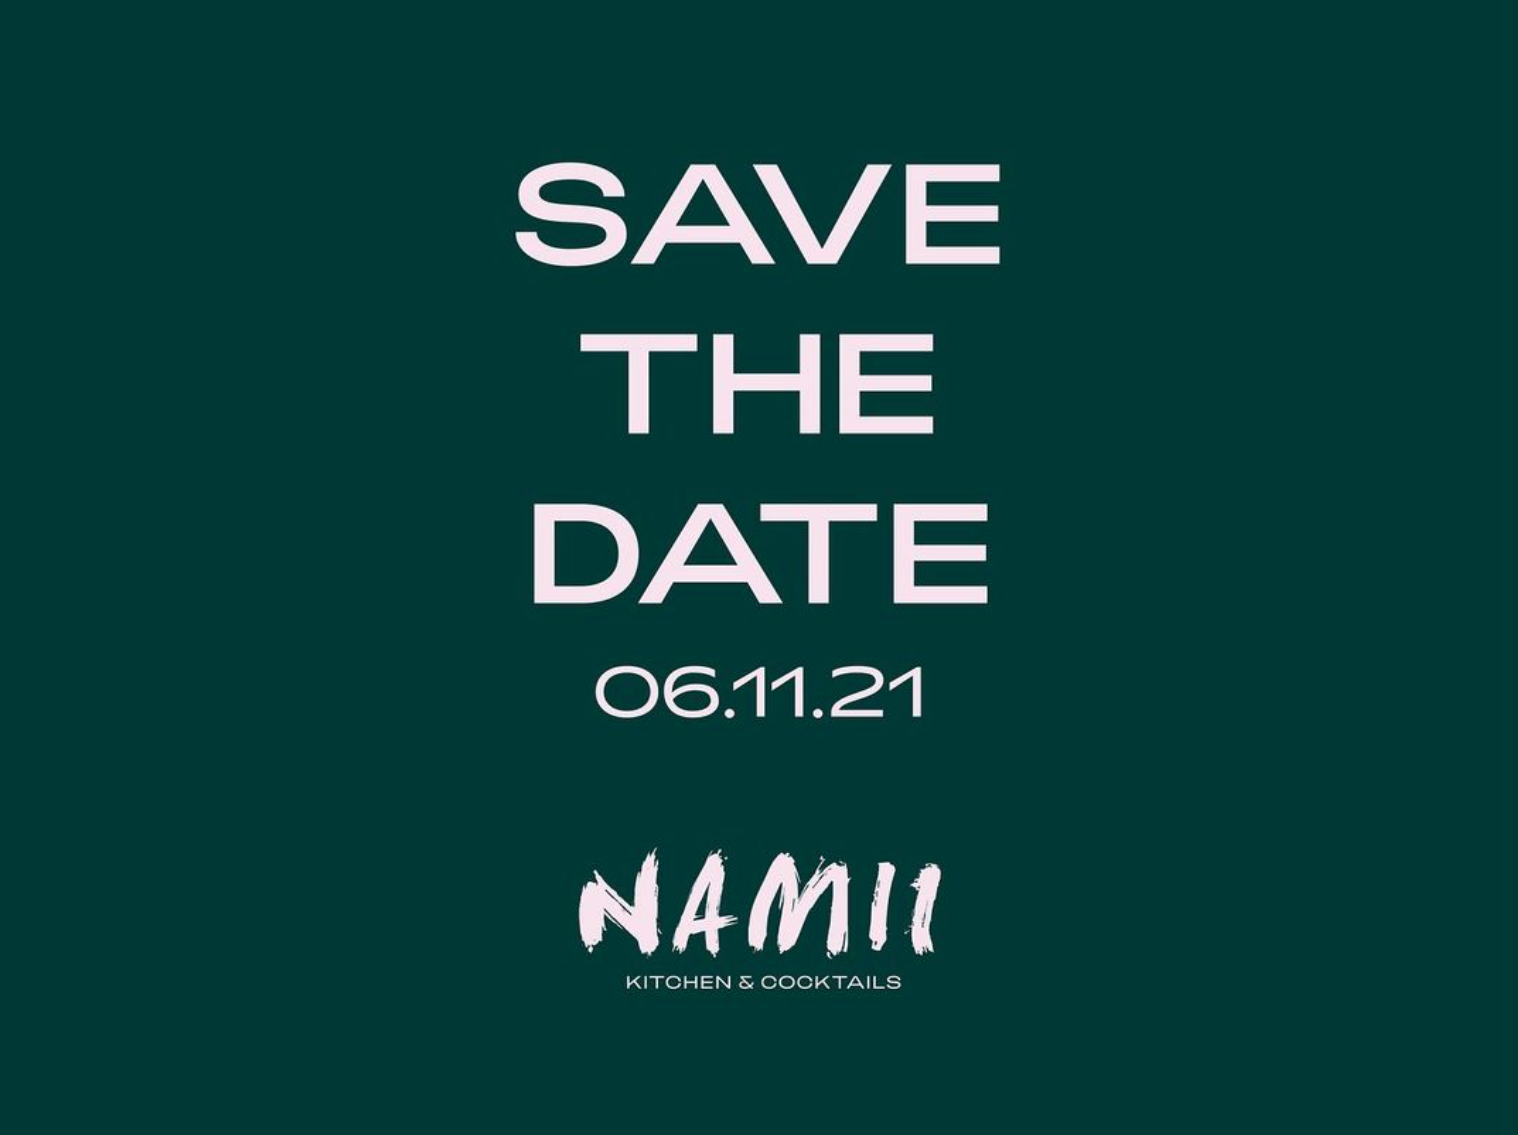 Namii: The new Vietnamese-style restaurant opening in Manchester, The Manc